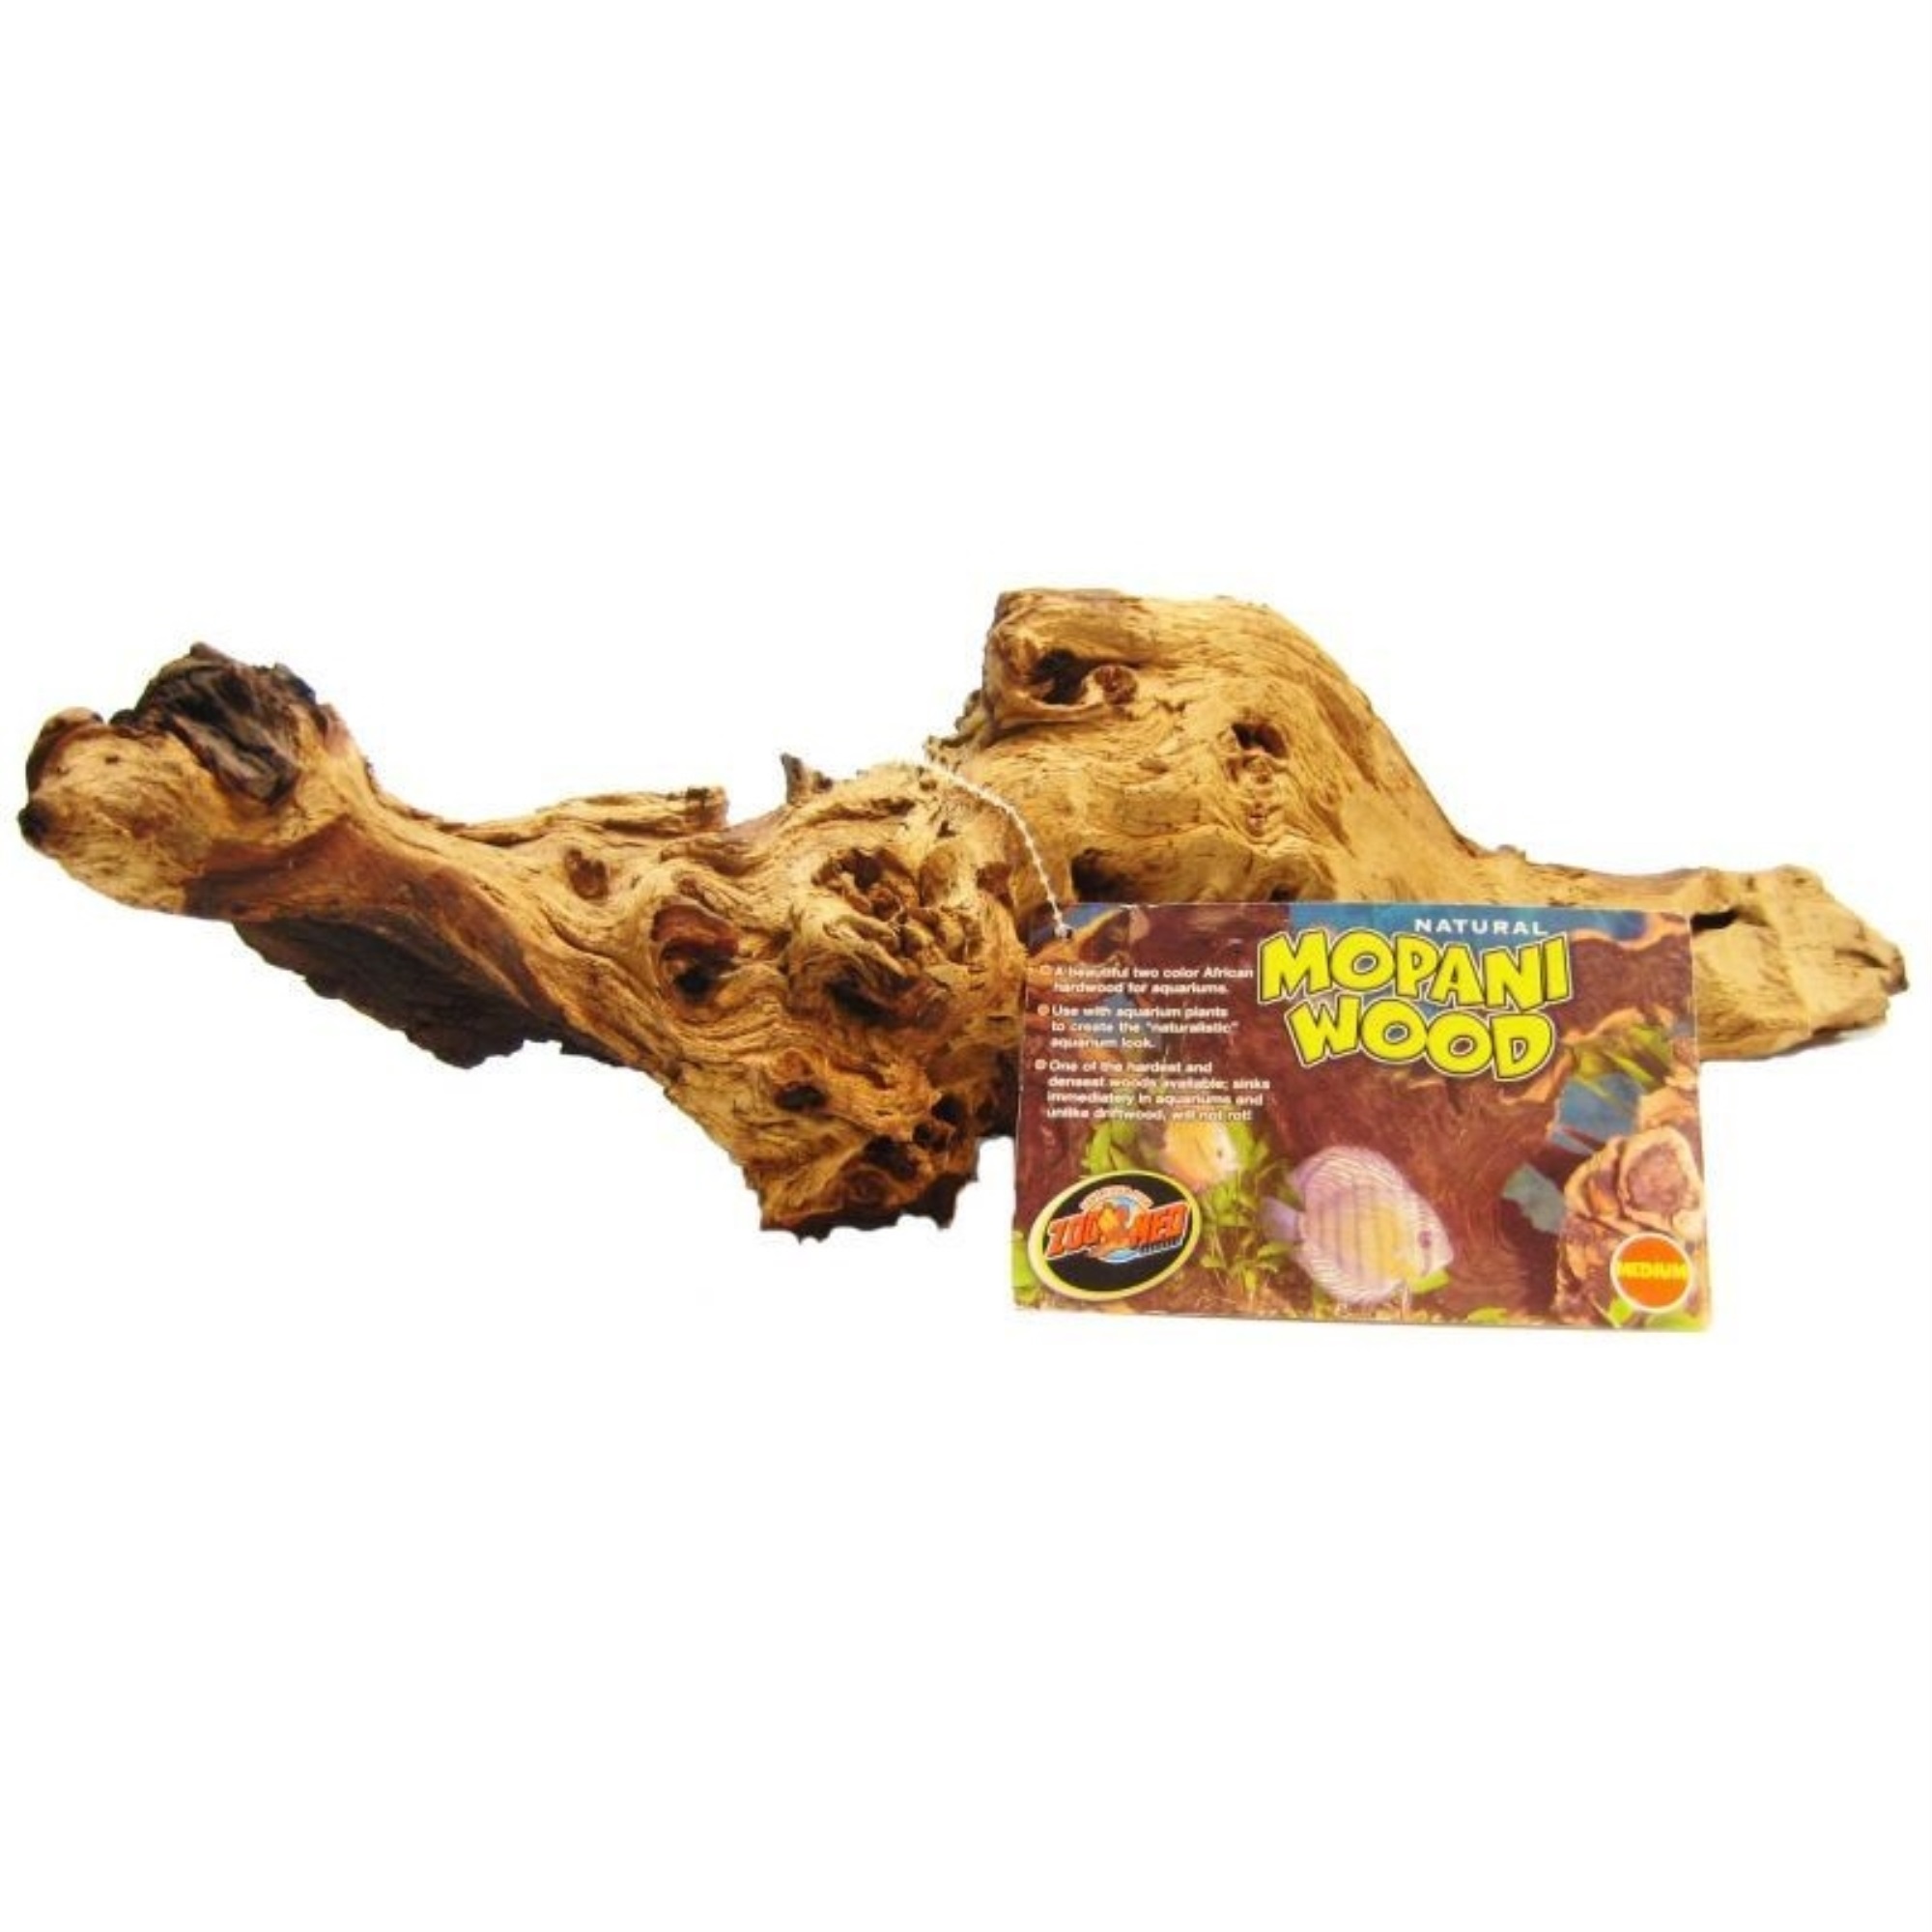 Zoo Med Natural Mopani Wood for Aquariums or Terrariums - image 1 of 2